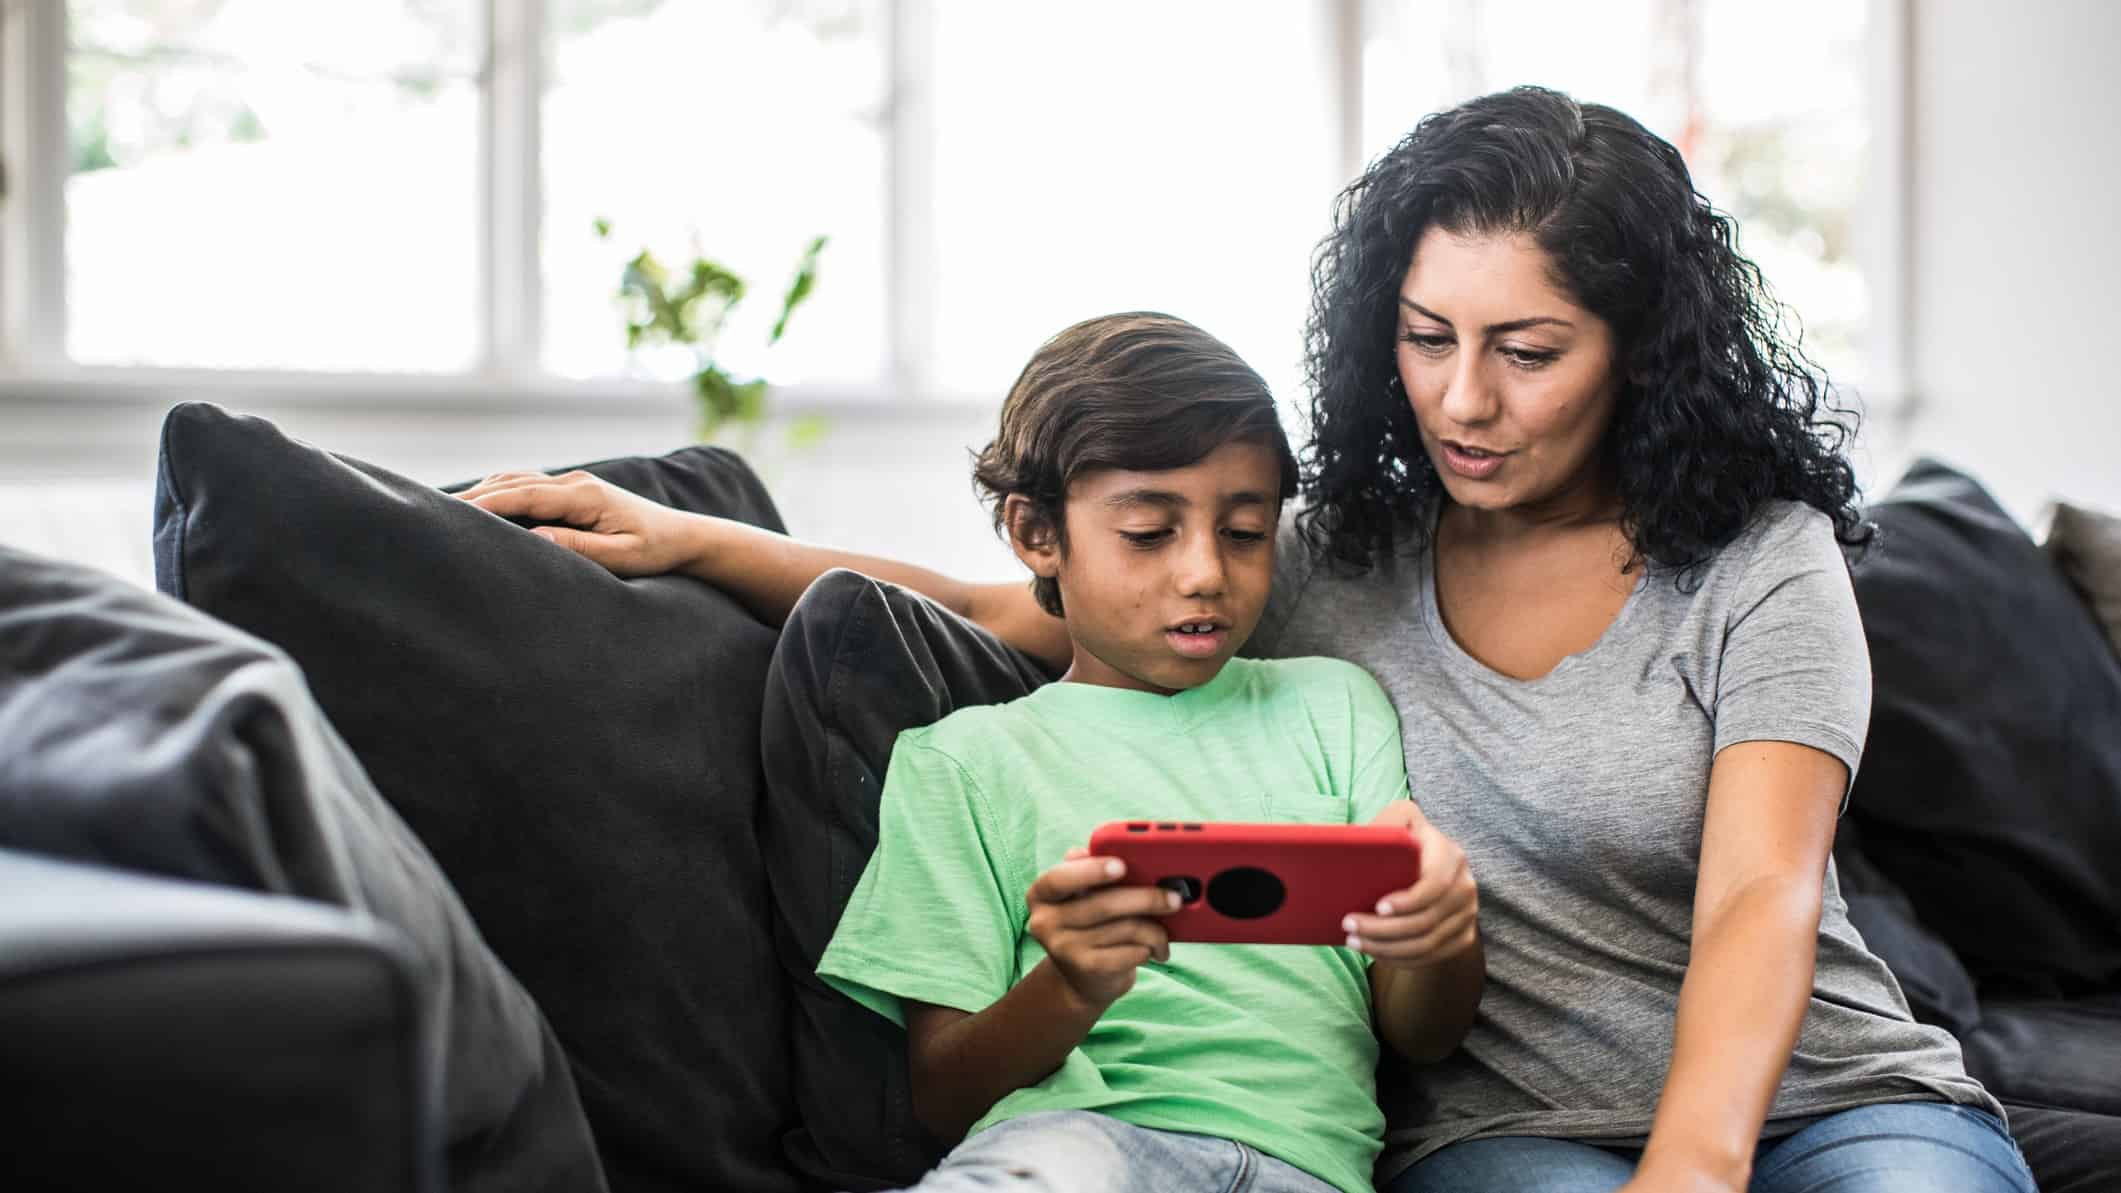 Mother and son sit on couch with son holding a tablet device